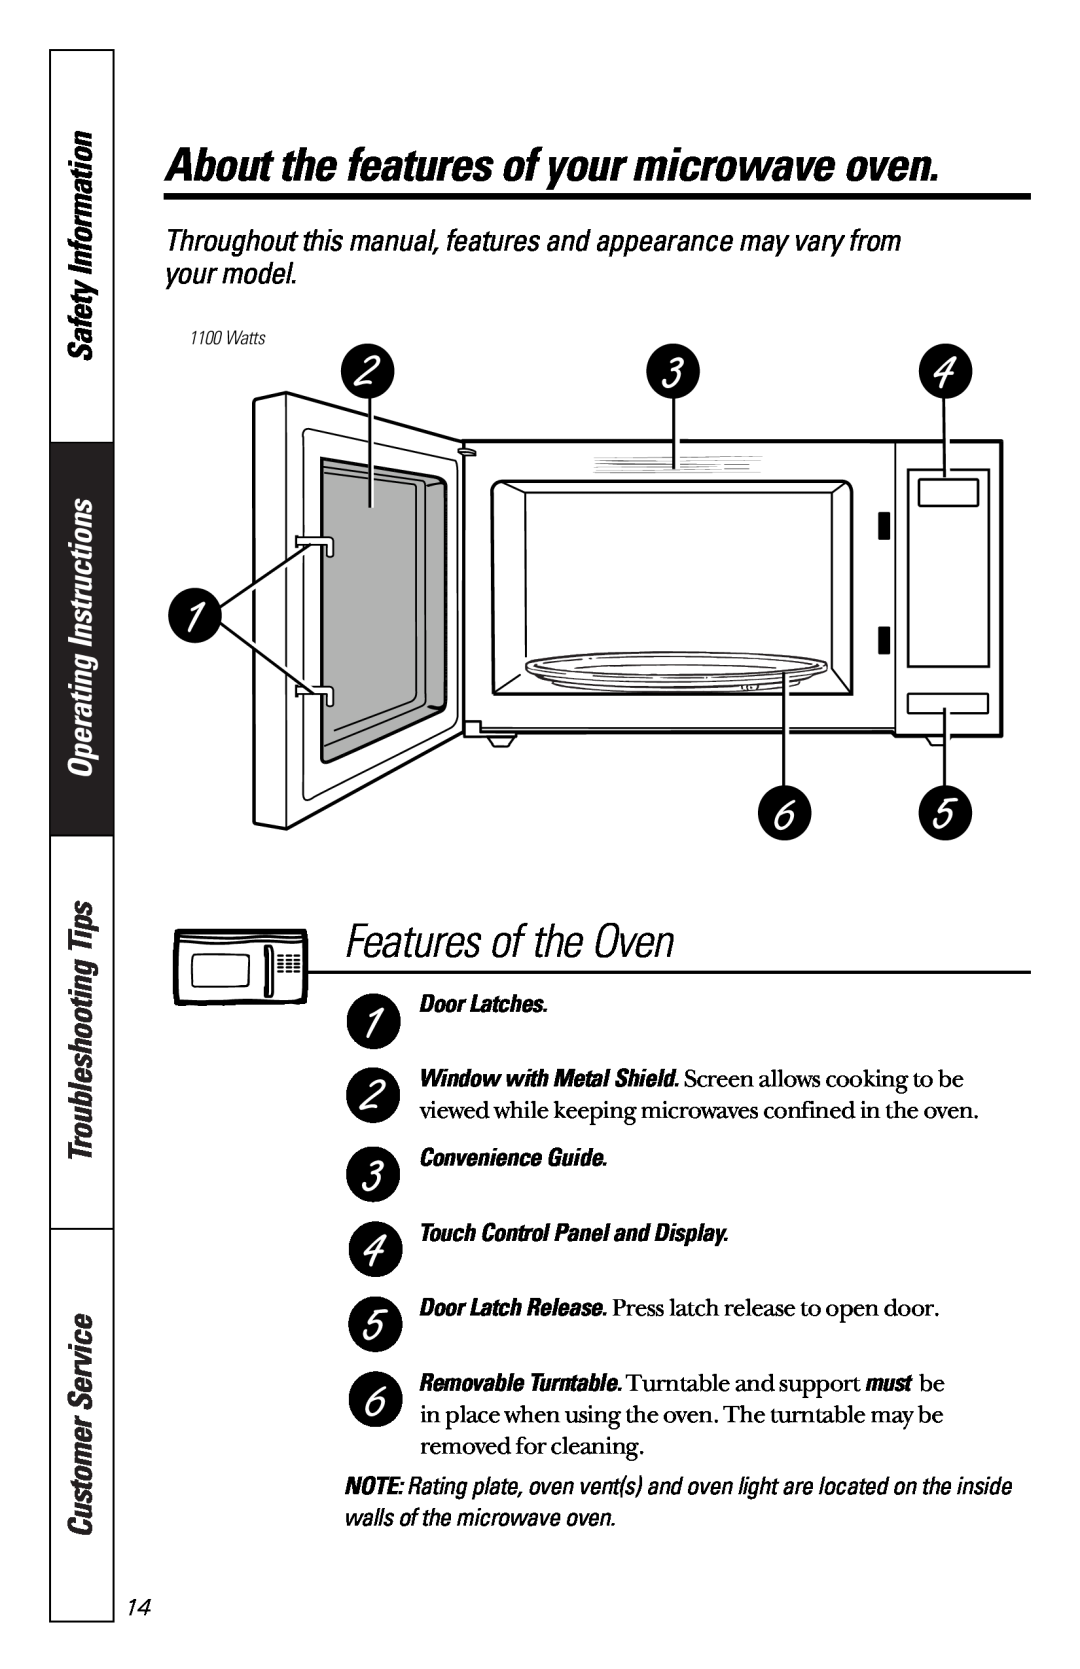 GE JES1851 Features of the Oven, About the features of your microwave oven, Safety Information, Operating Instructions 